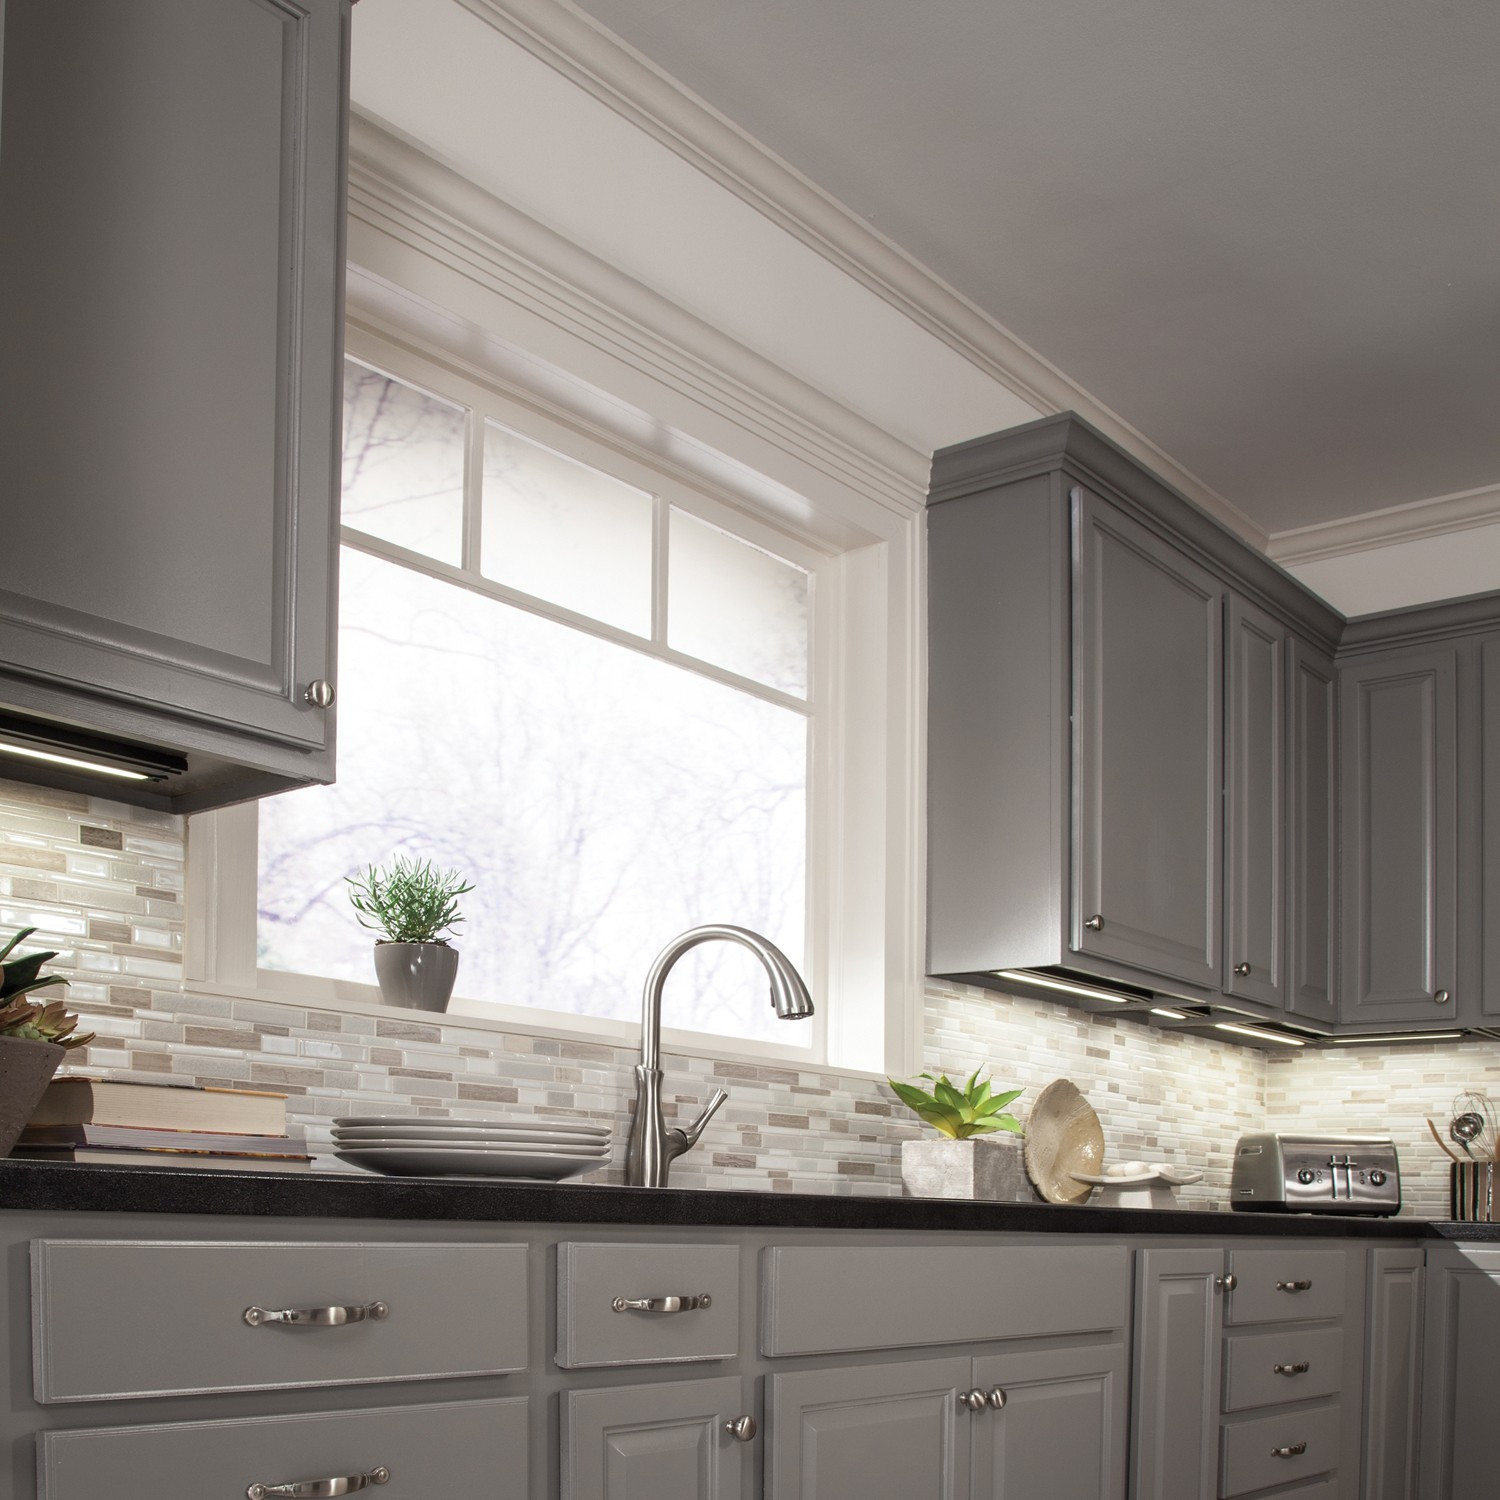 Kitchen Cabinets Led Lighting
 How To Light A Kitchen For Aging Eyes